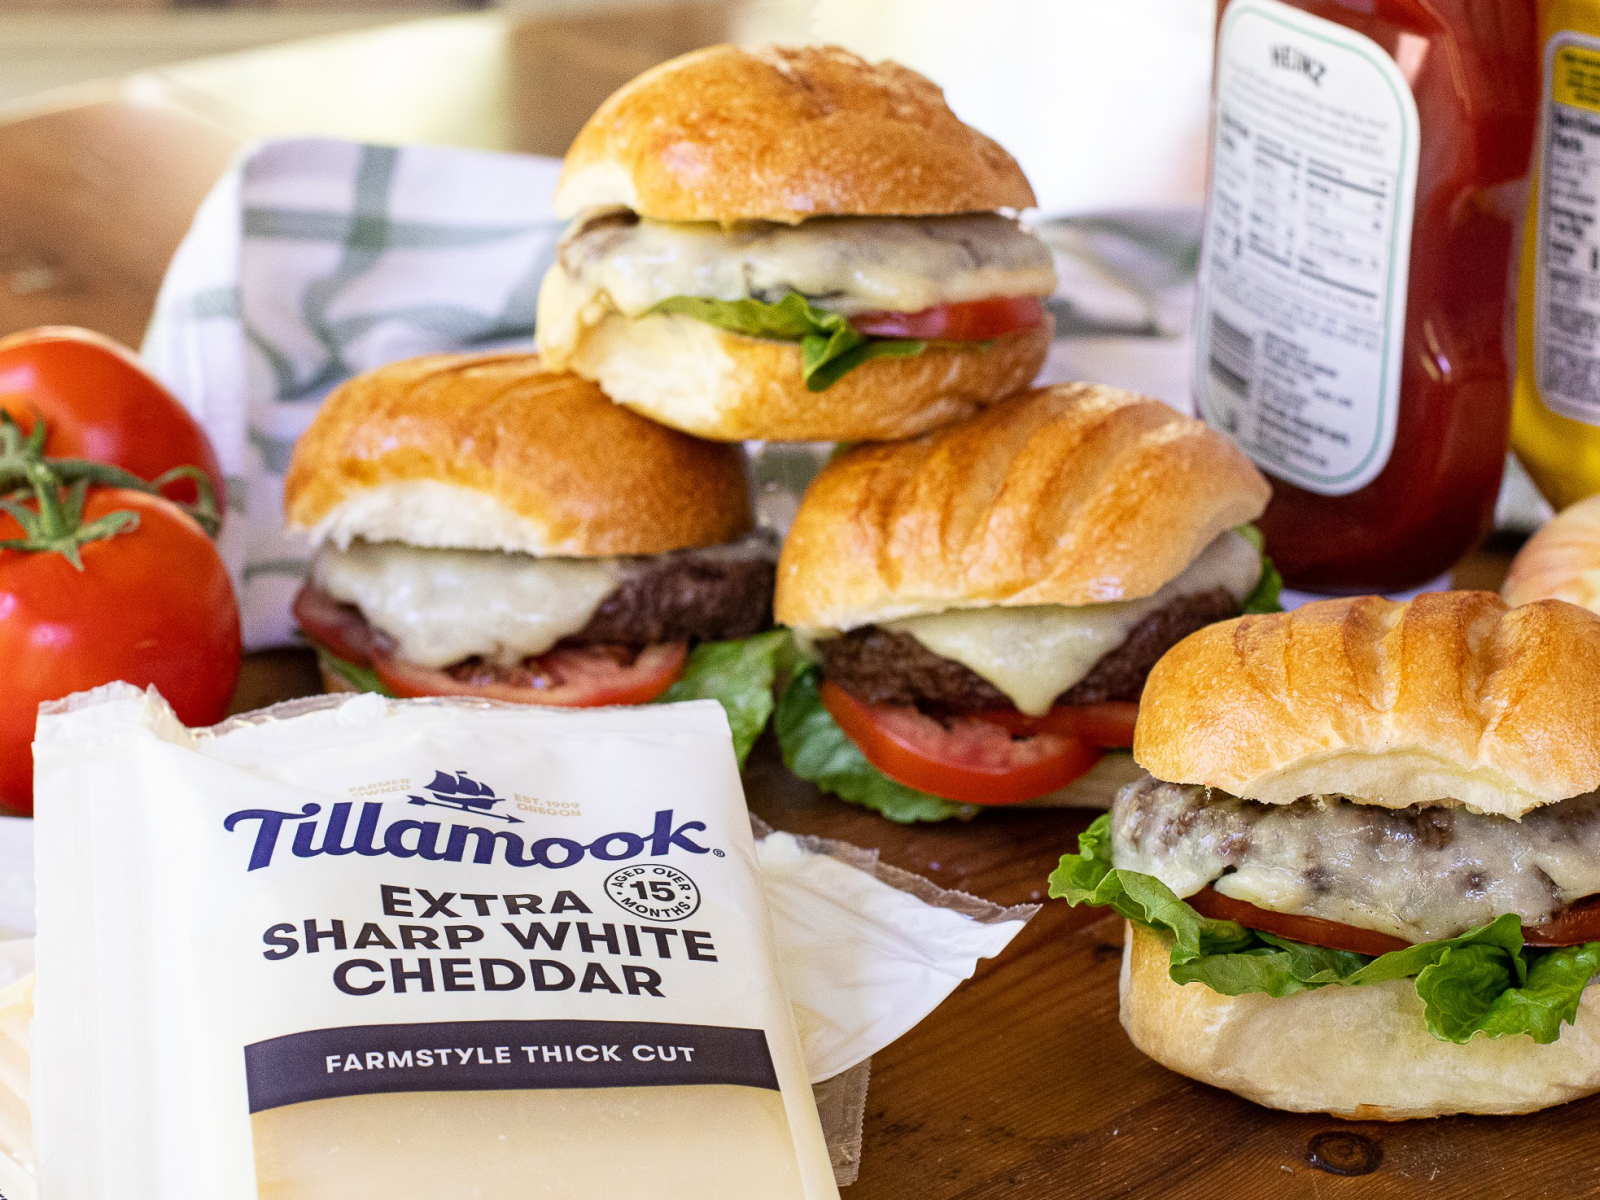 Don’t Miss The Chance To Save On Your Favorite Tillamook Cheese At Publix